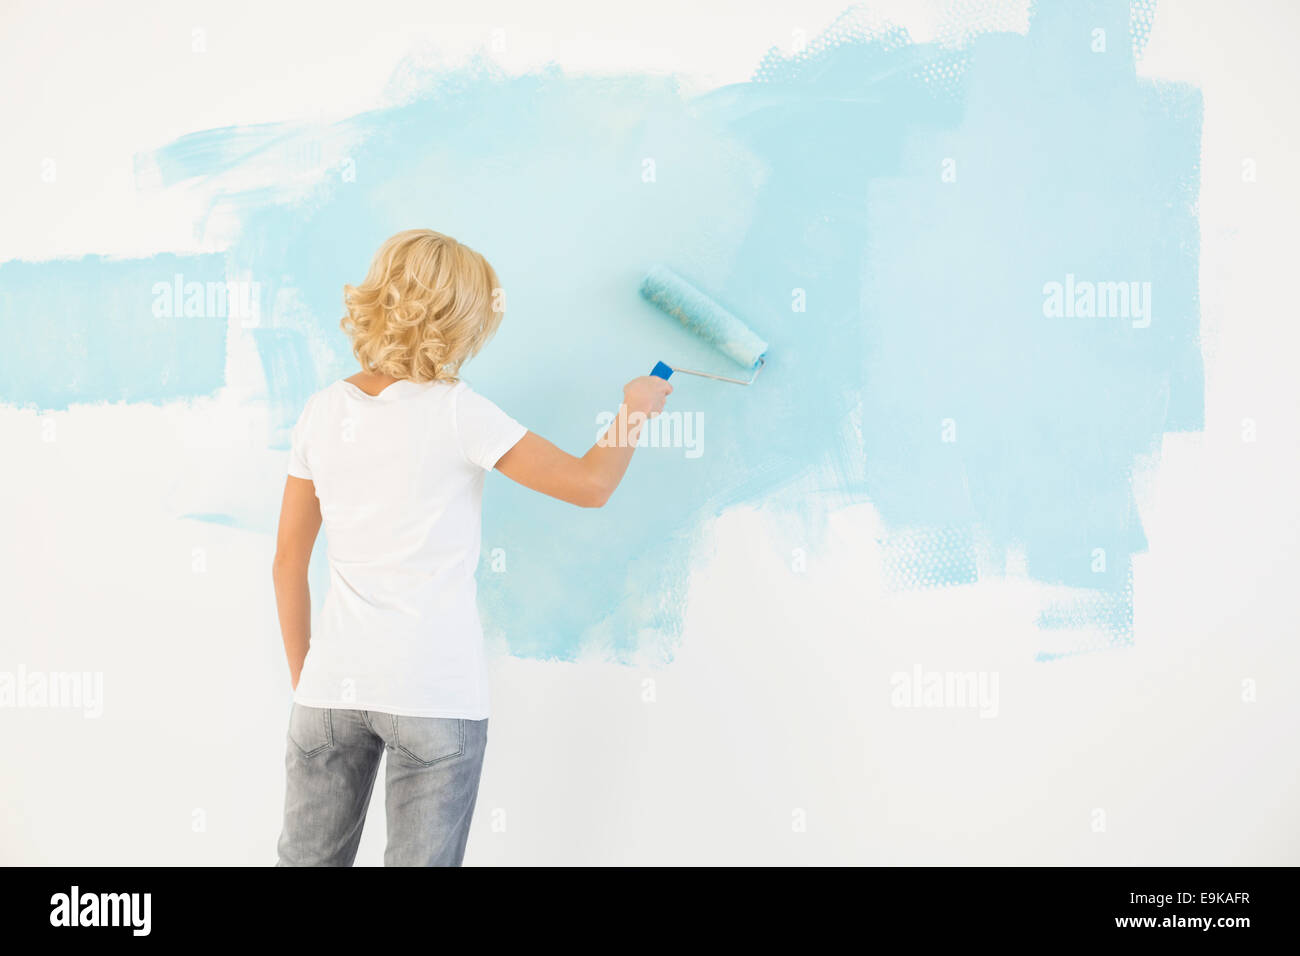 Rear view of woman painting wall with paint roller Banque D'Images